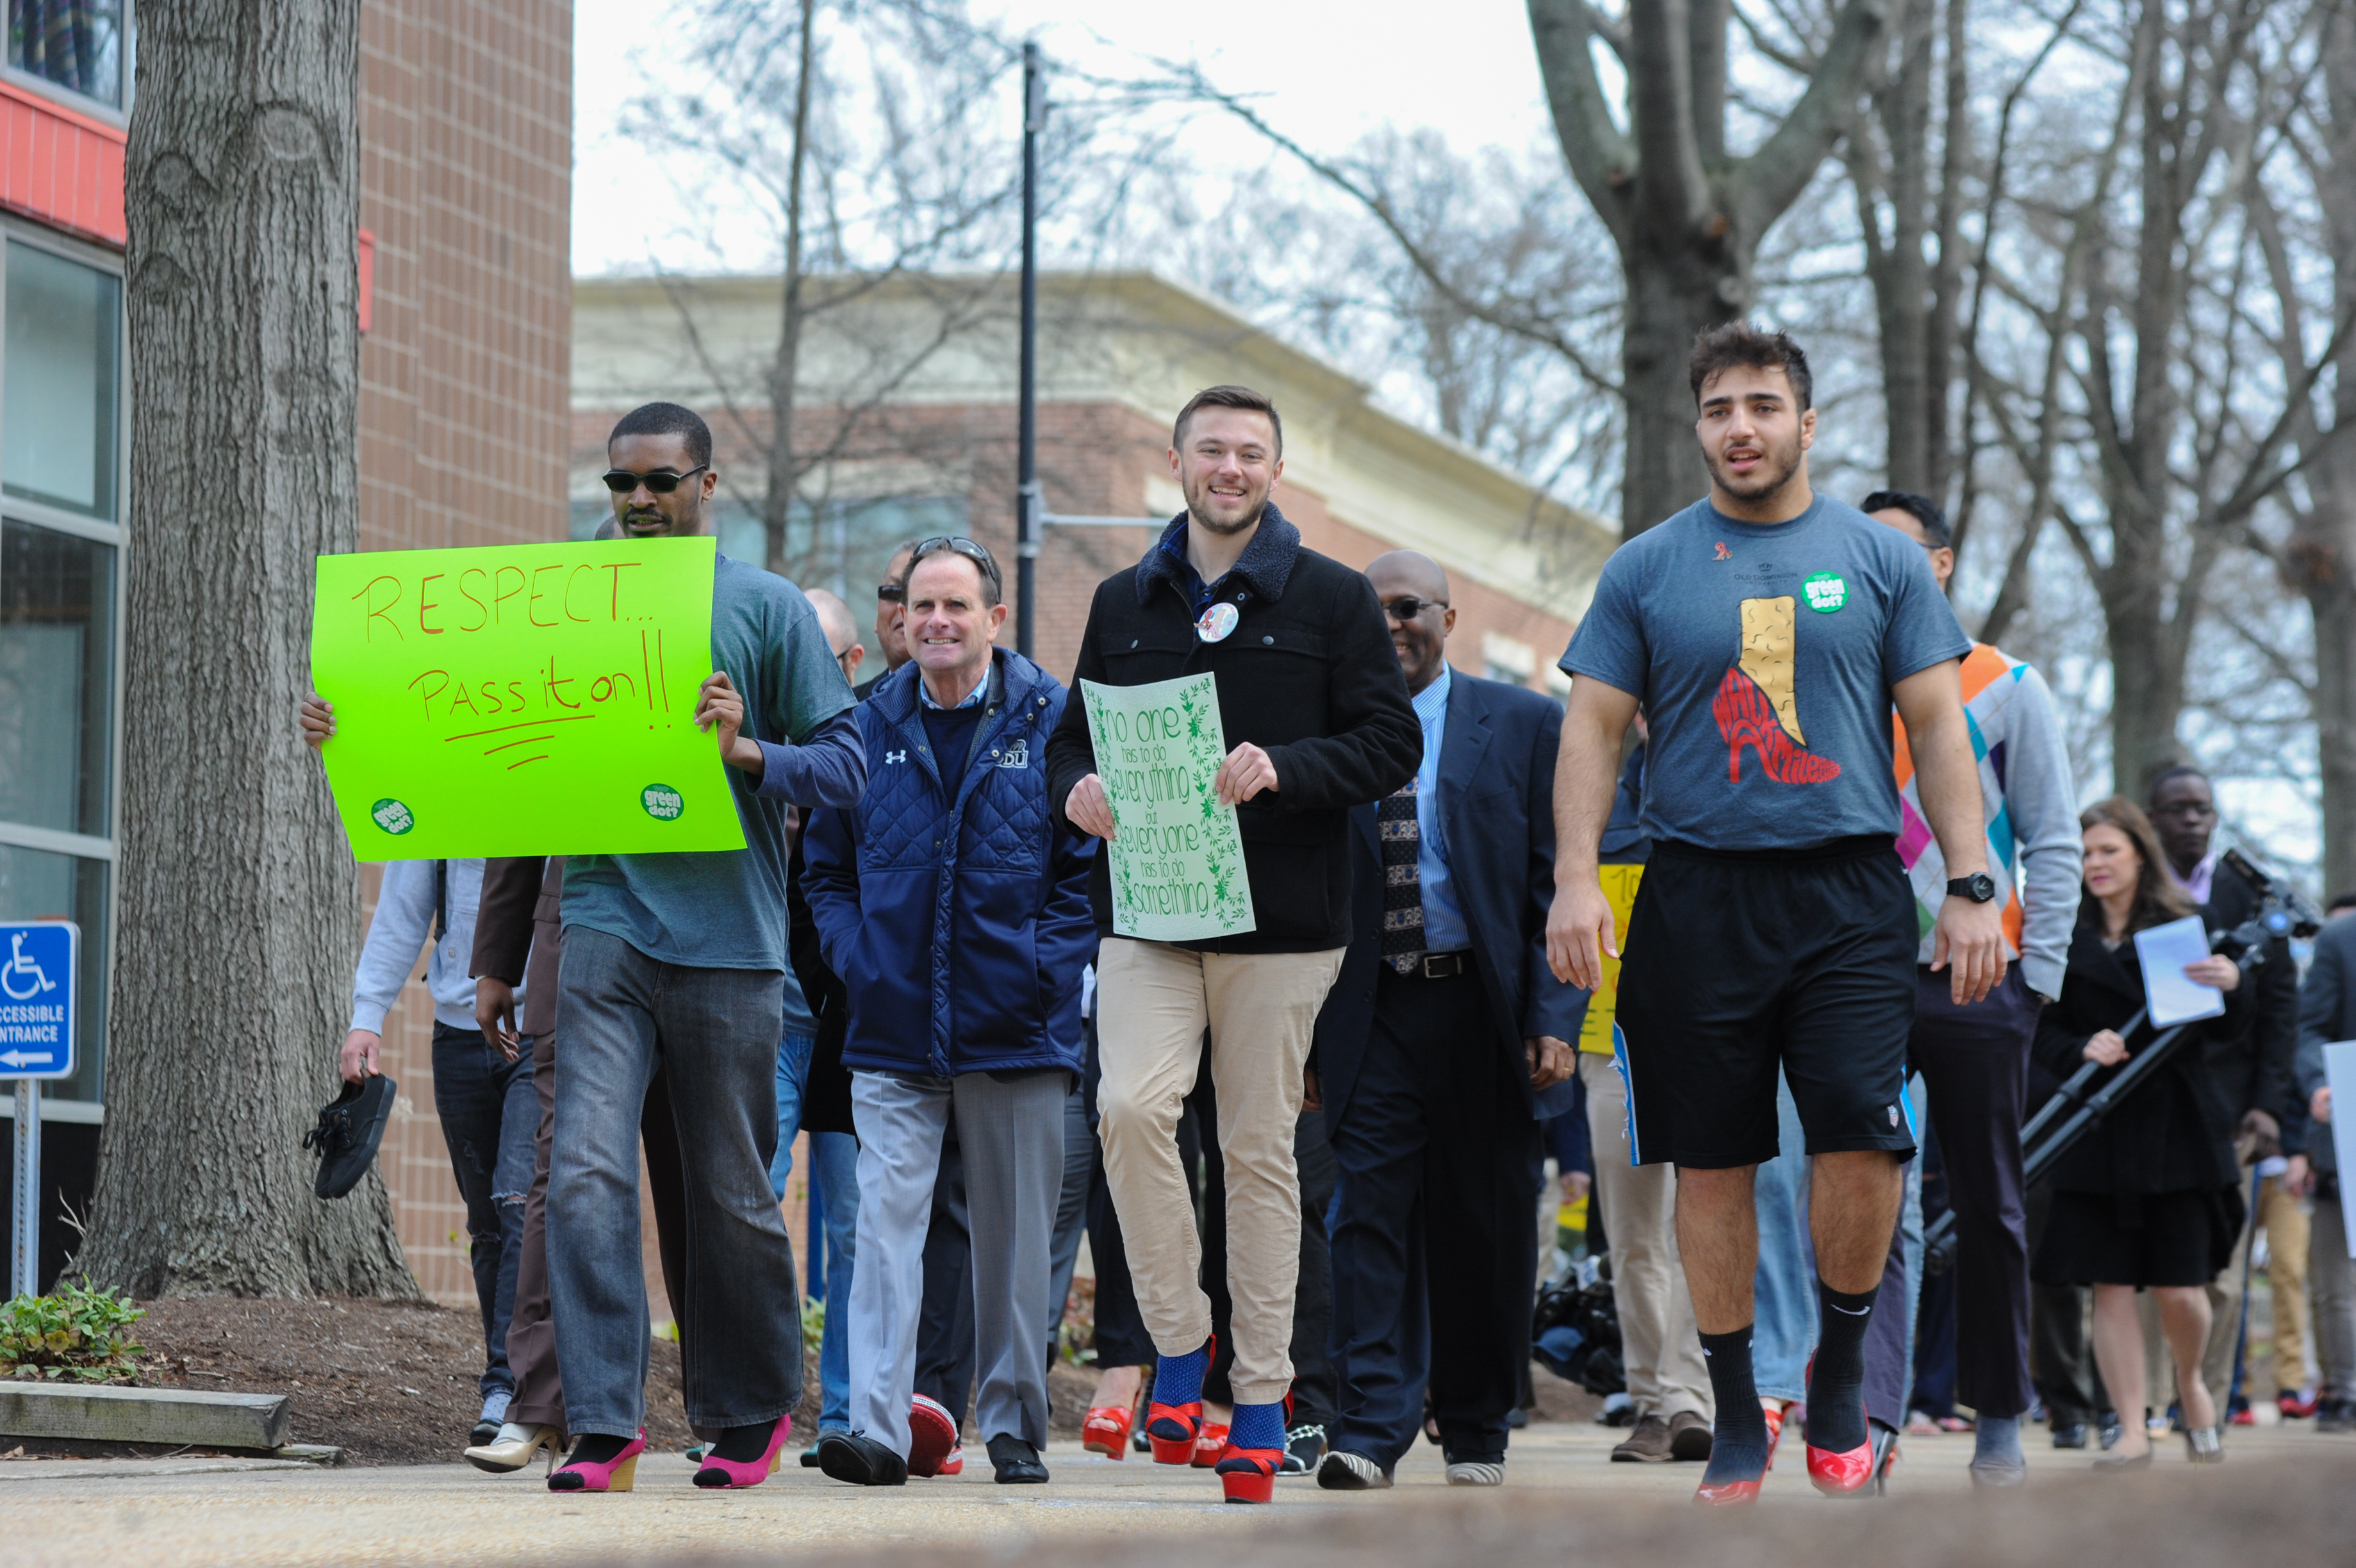 Walk A Mile in Her Shoes